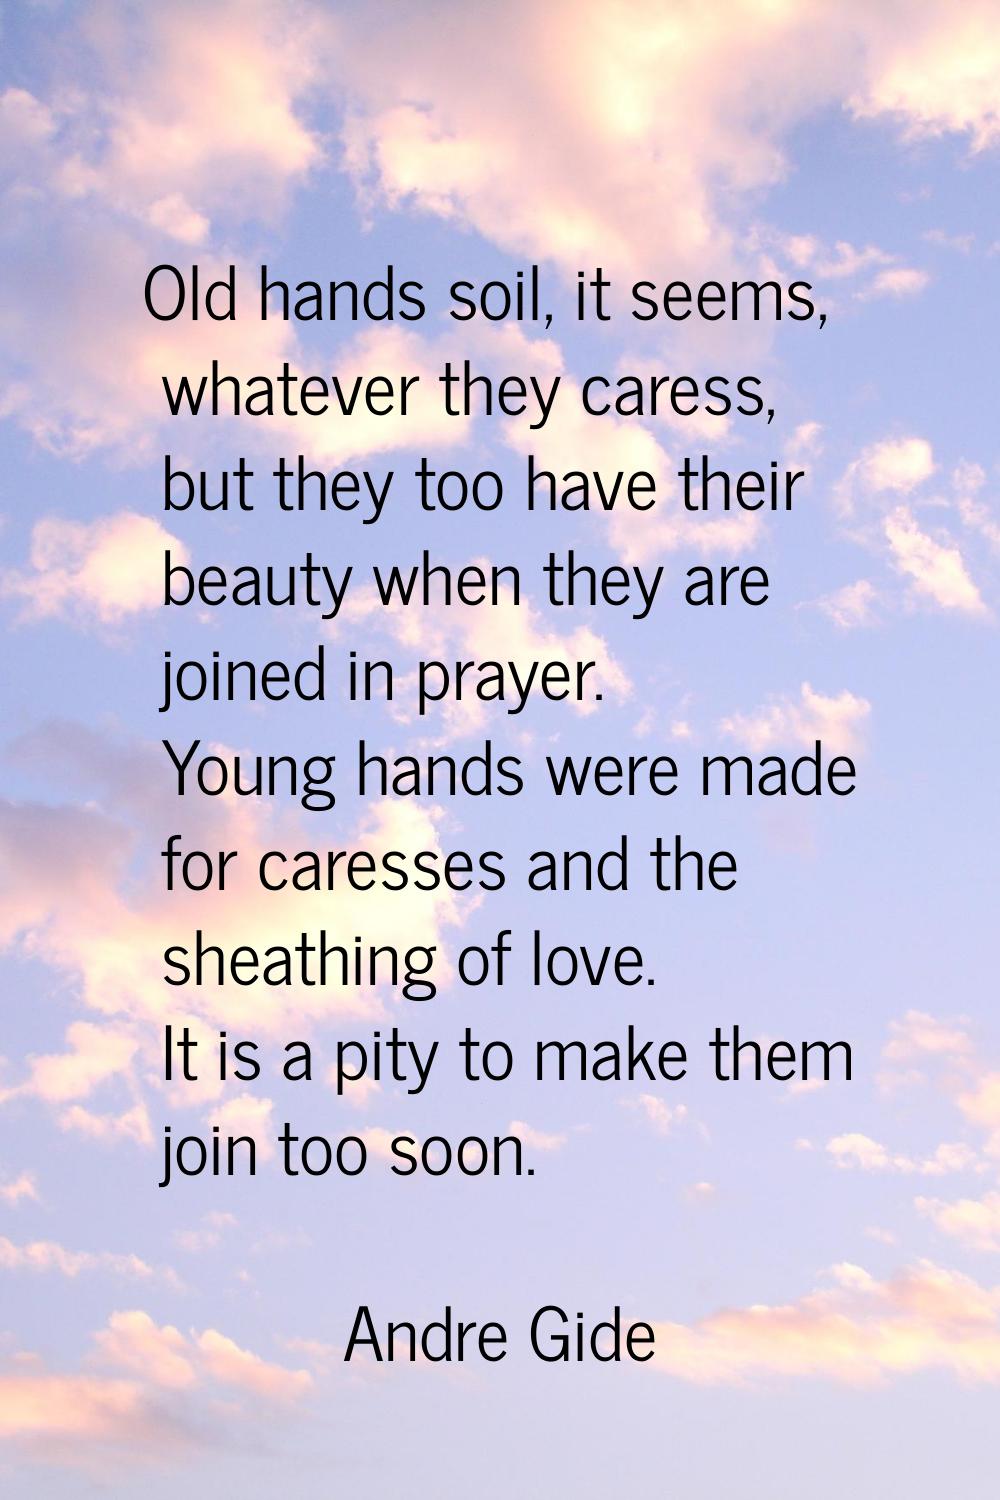 Old hands soil, it seems, whatever they caress, but they too have their beauty when they are joined